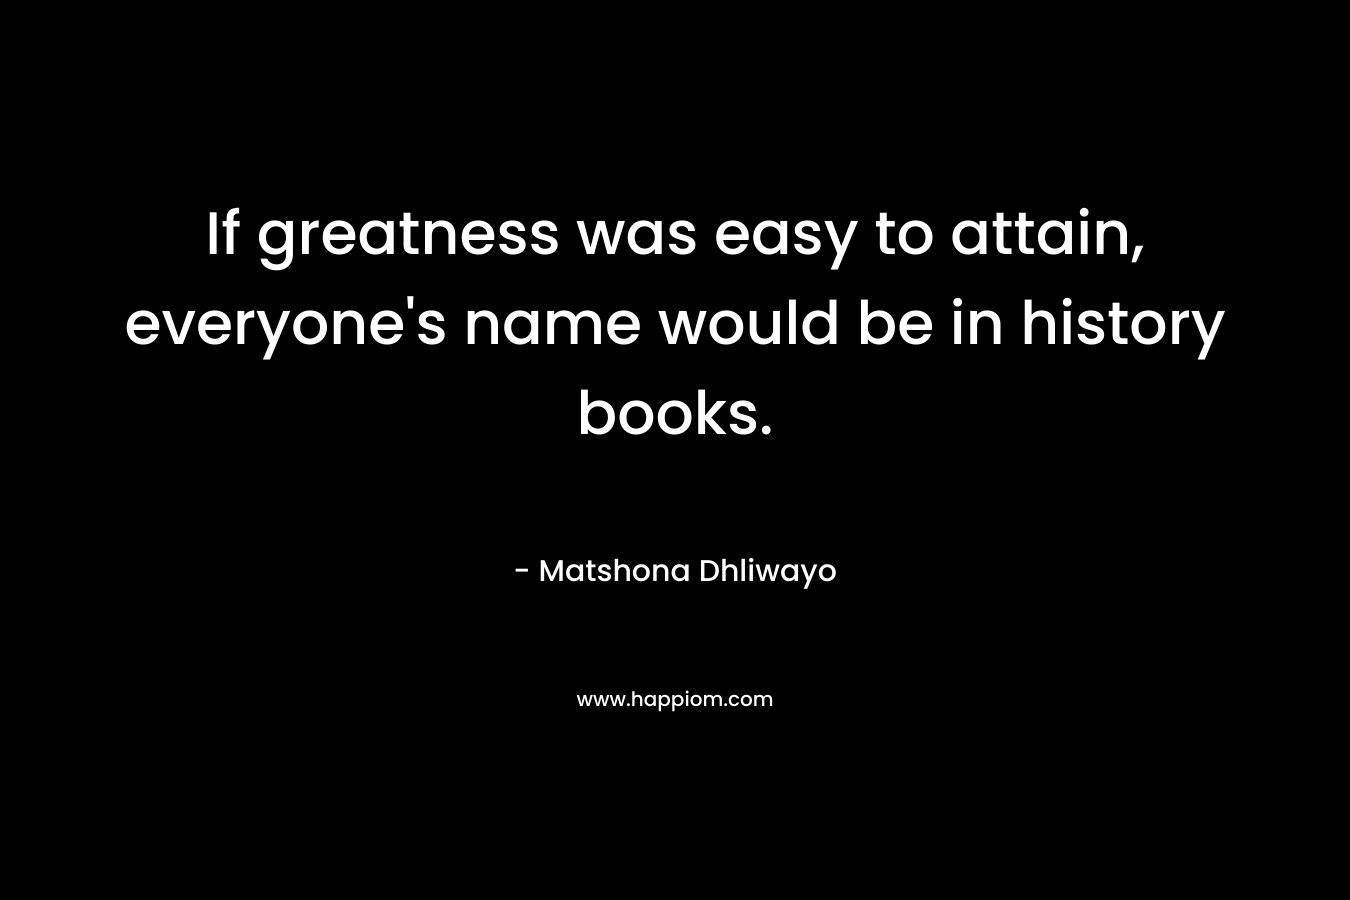 If greatness was easy to attain, everyone's name would be in history books.